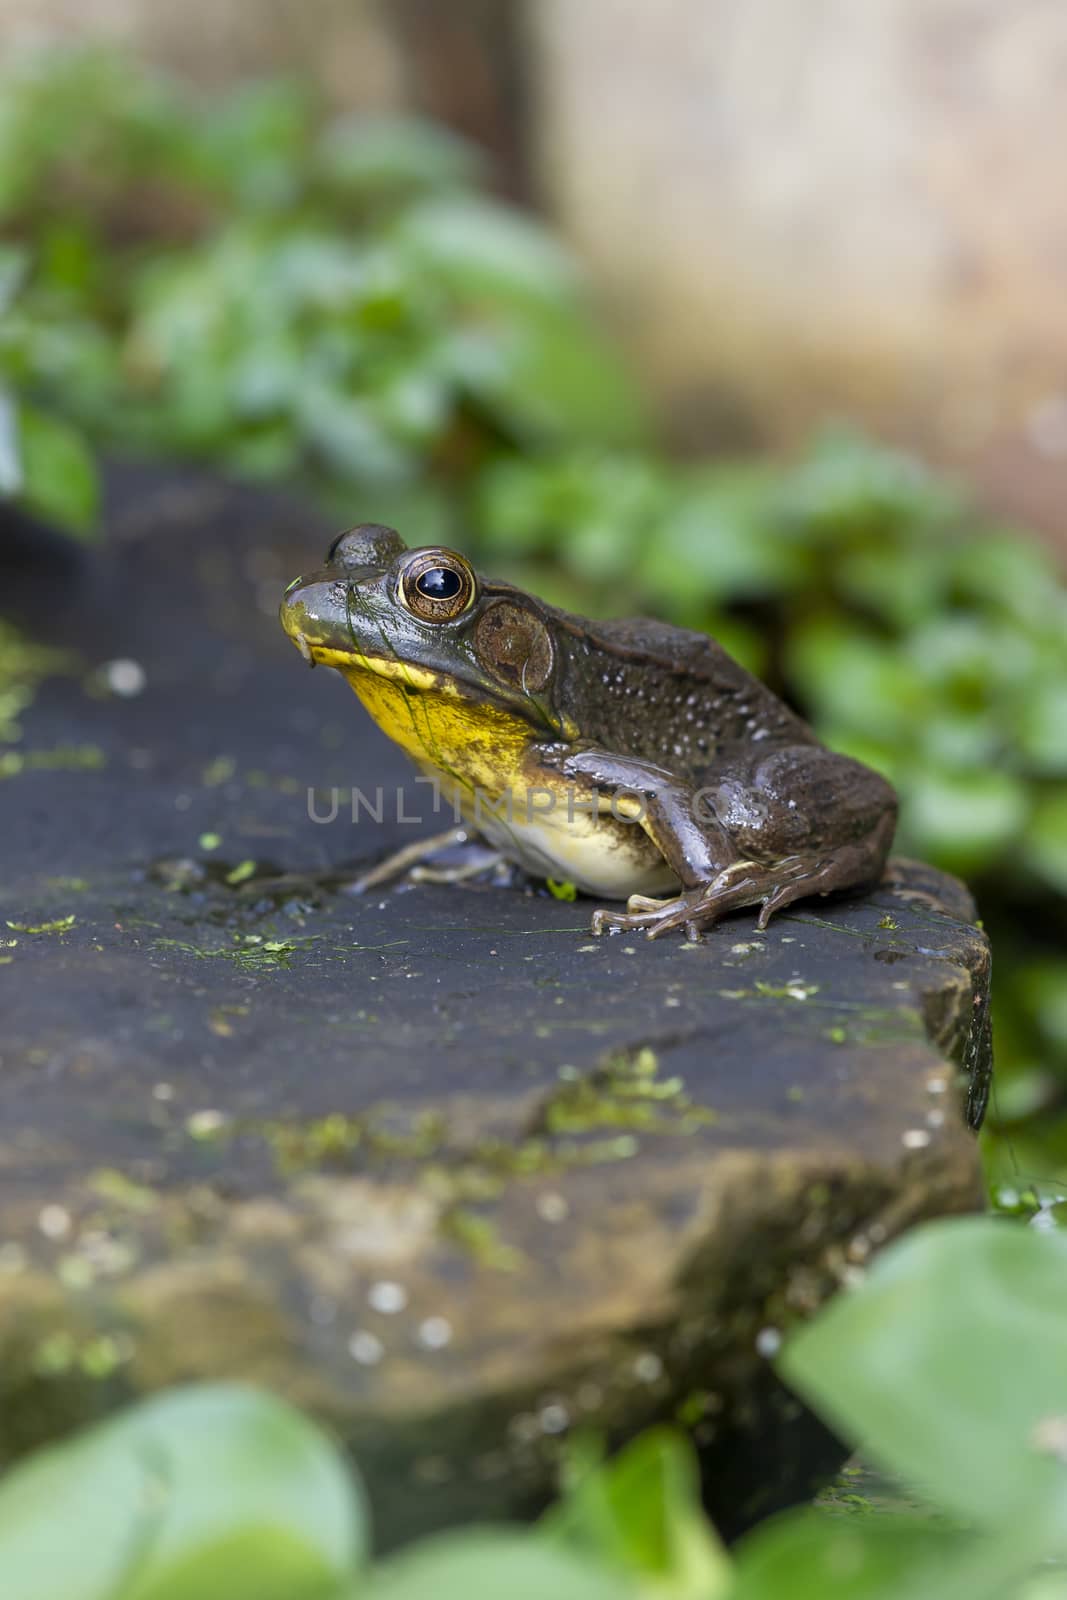 A Frog sitting on a rock in a garden pond surrounded by green leaves by WittkePhotos